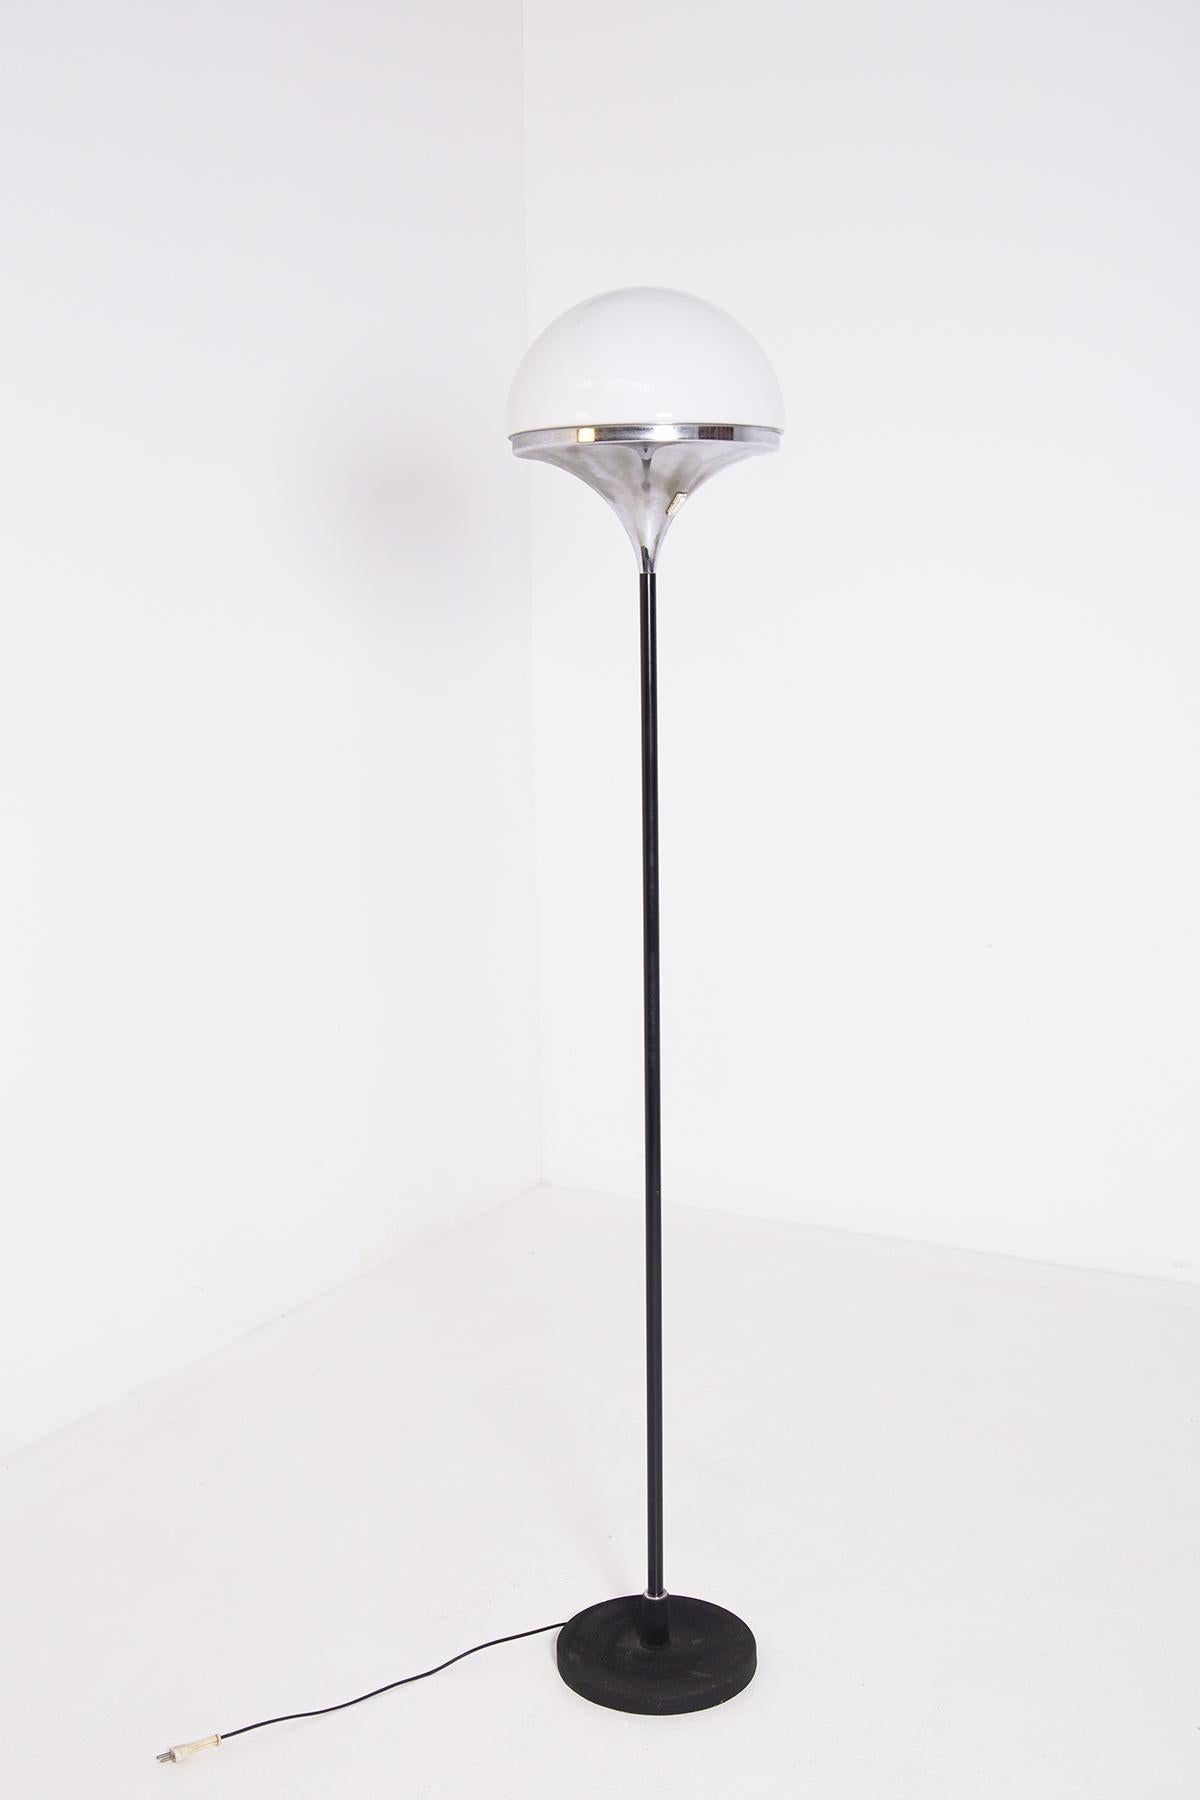 Floor lamp manufactured by Stilnovo at the end of the 50s and beginning of the 60s. 
The terr lamp is made with an iron or cast iron base painted black with a painted steel stem.
The ceiling lamp that contains its light and semi-spherical opaline